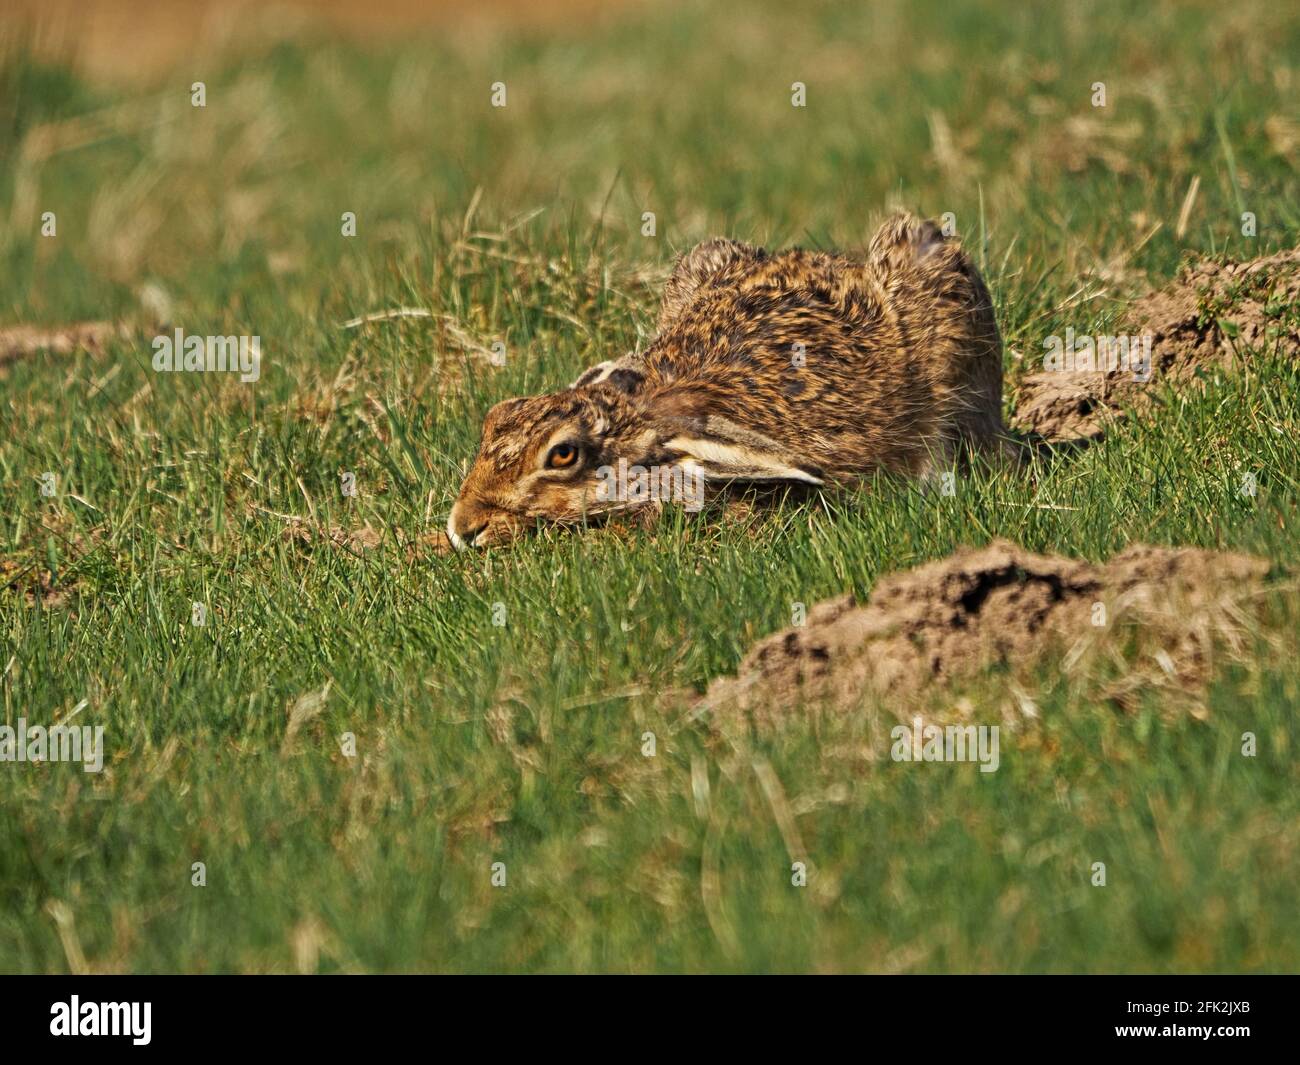 Hiding in plain view - Brown Hare or European Hare (Lepus europaeus) lying low by mud in grassy field trying to avoid detection. Cumbria, England, UK Stock Photo